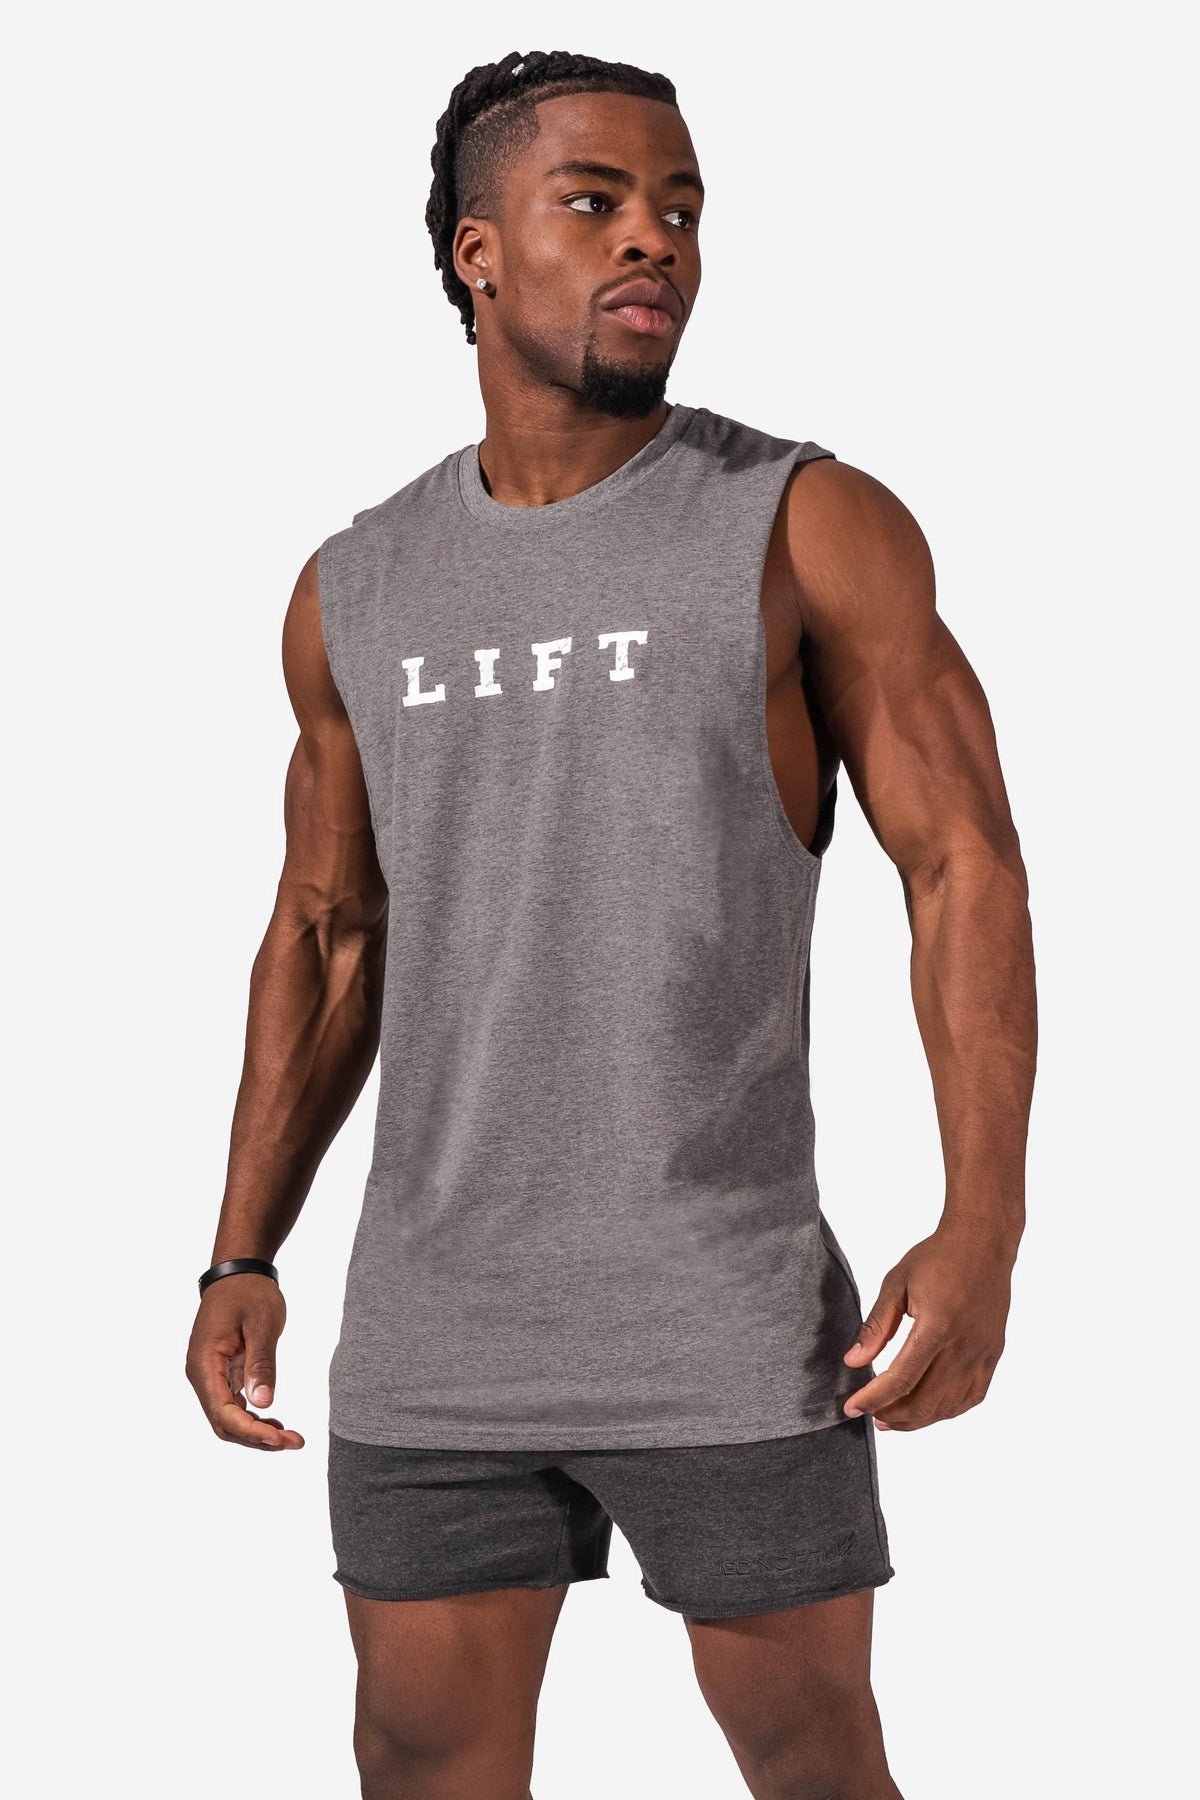 https://jednorth.com/cdn/shop/products/mens-active-cut-off-sleeveless-tee-gray-tank-tops-jed-north-267630_1200x.jpg?v=1682527548